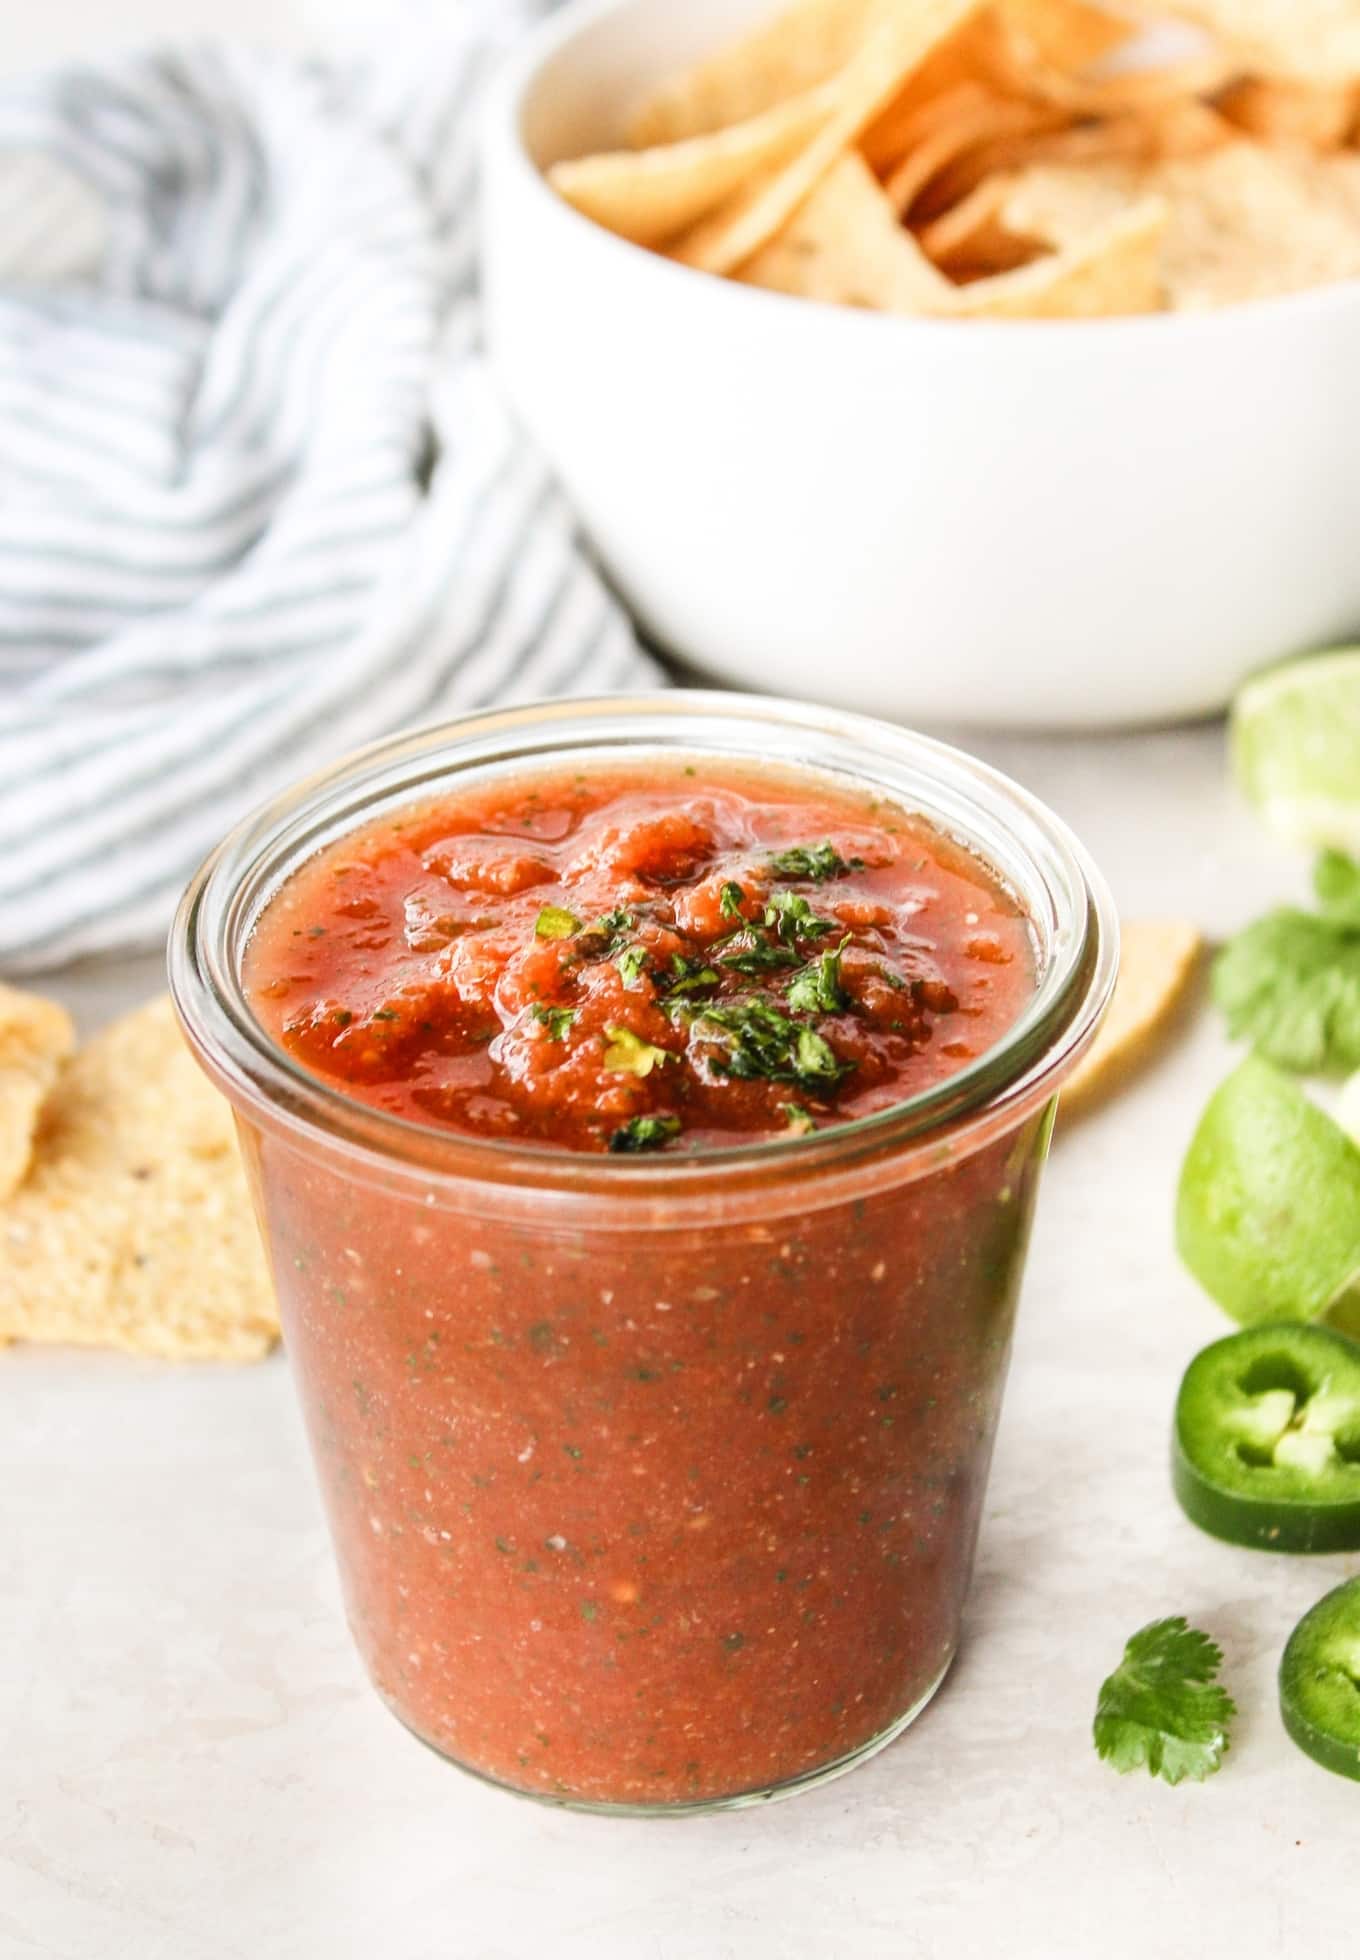 https://thewholecook.com/wp-content/uploads/2021/02/5-Minute-Blender-Salsa-by-The-Whole-Cook-vertical-2.jpg